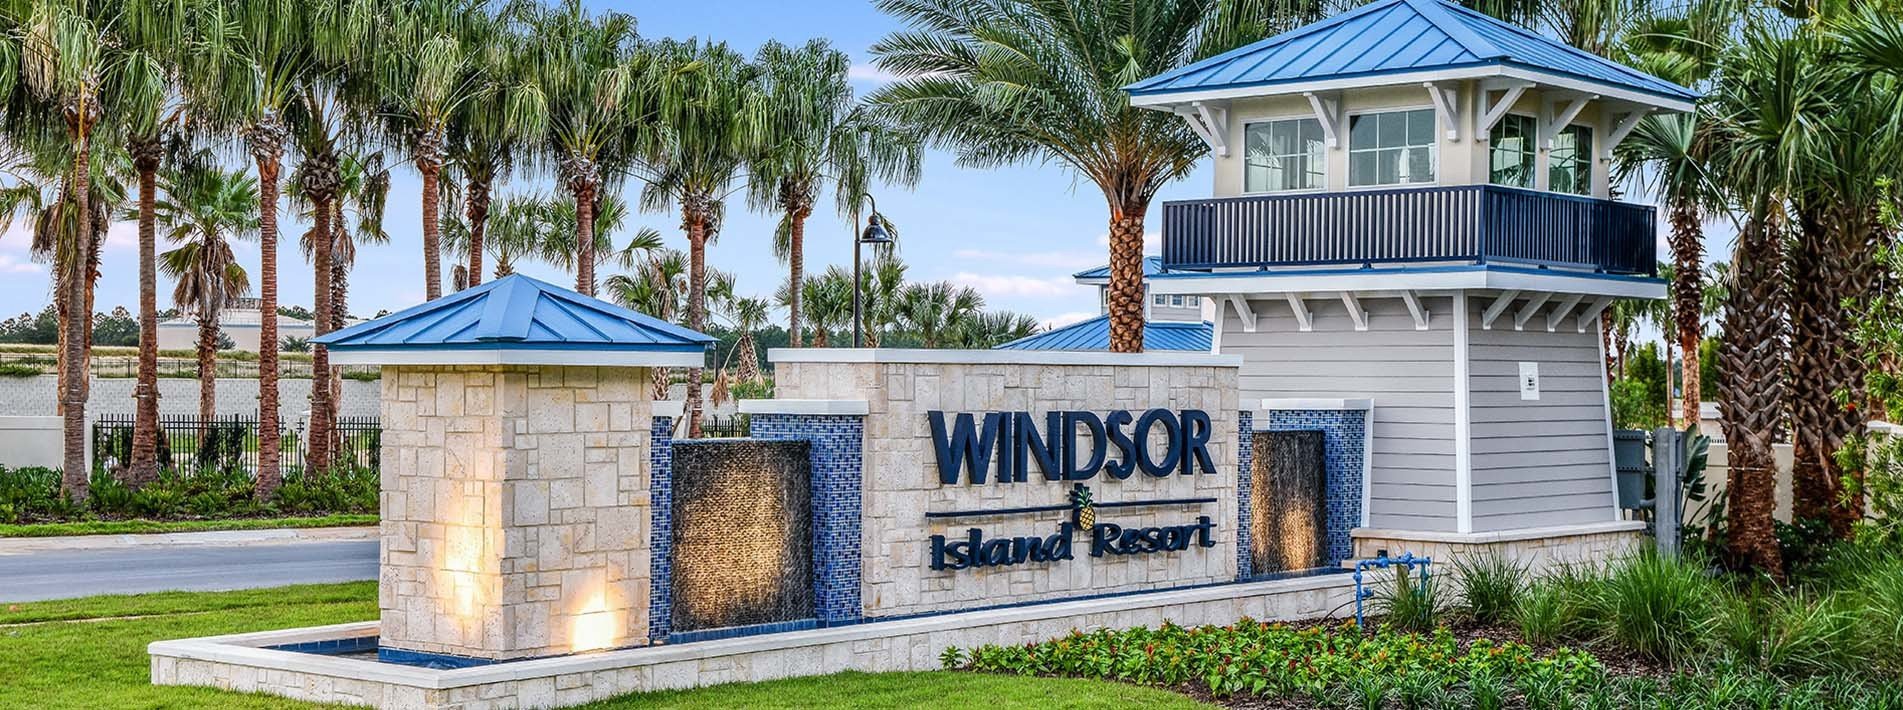 Windsor Island Resort Kissimmee Vacation Homes for Sale